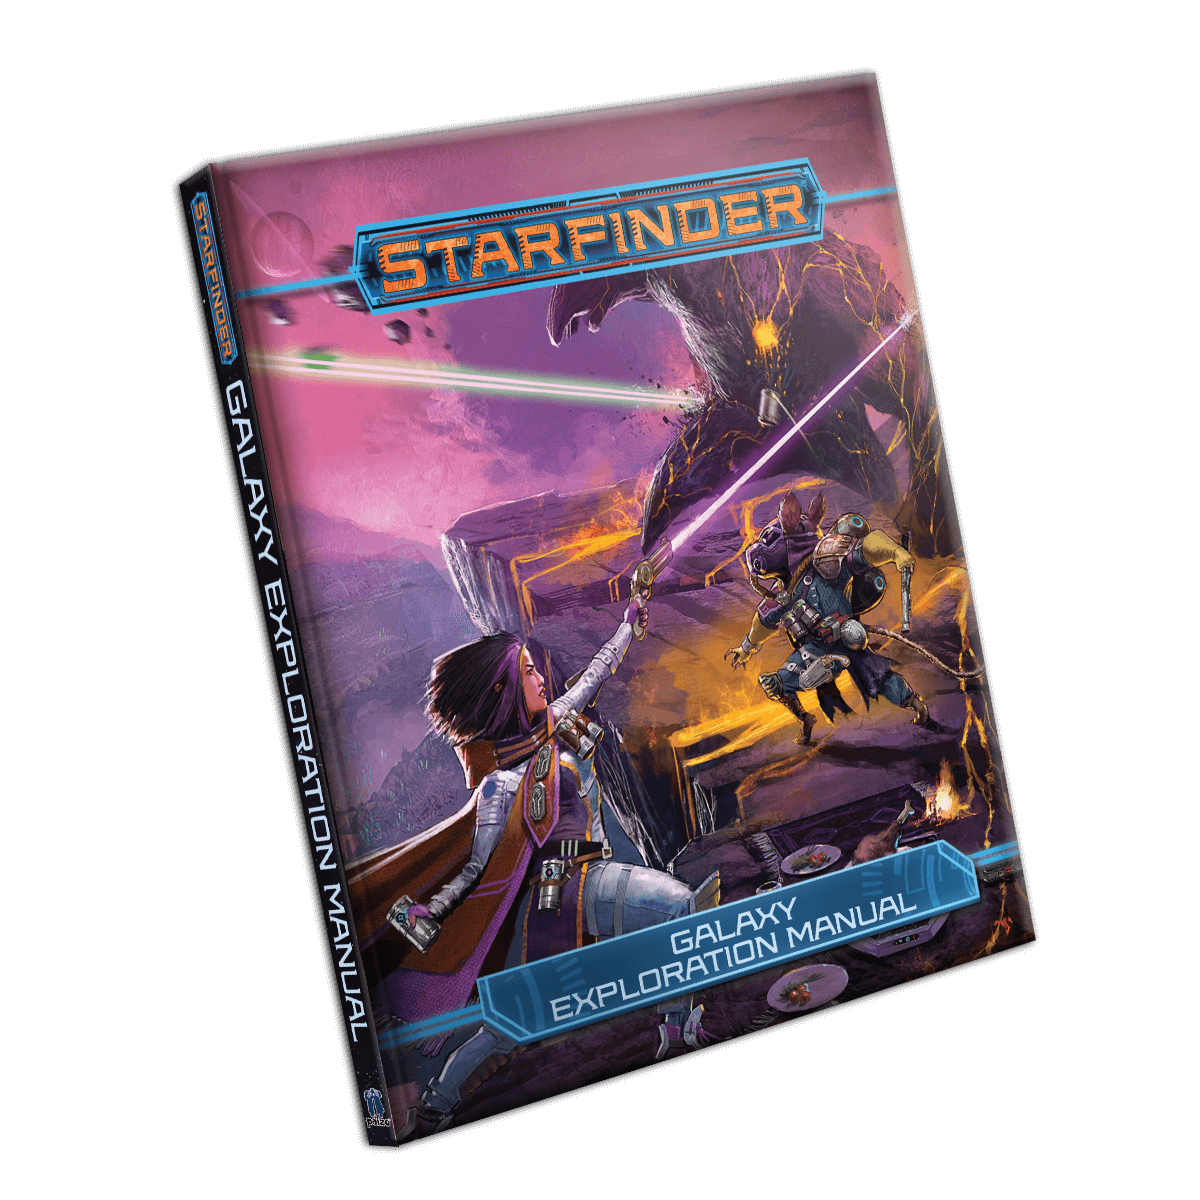 Cover image for Starfinder Galaxy Exploration manual